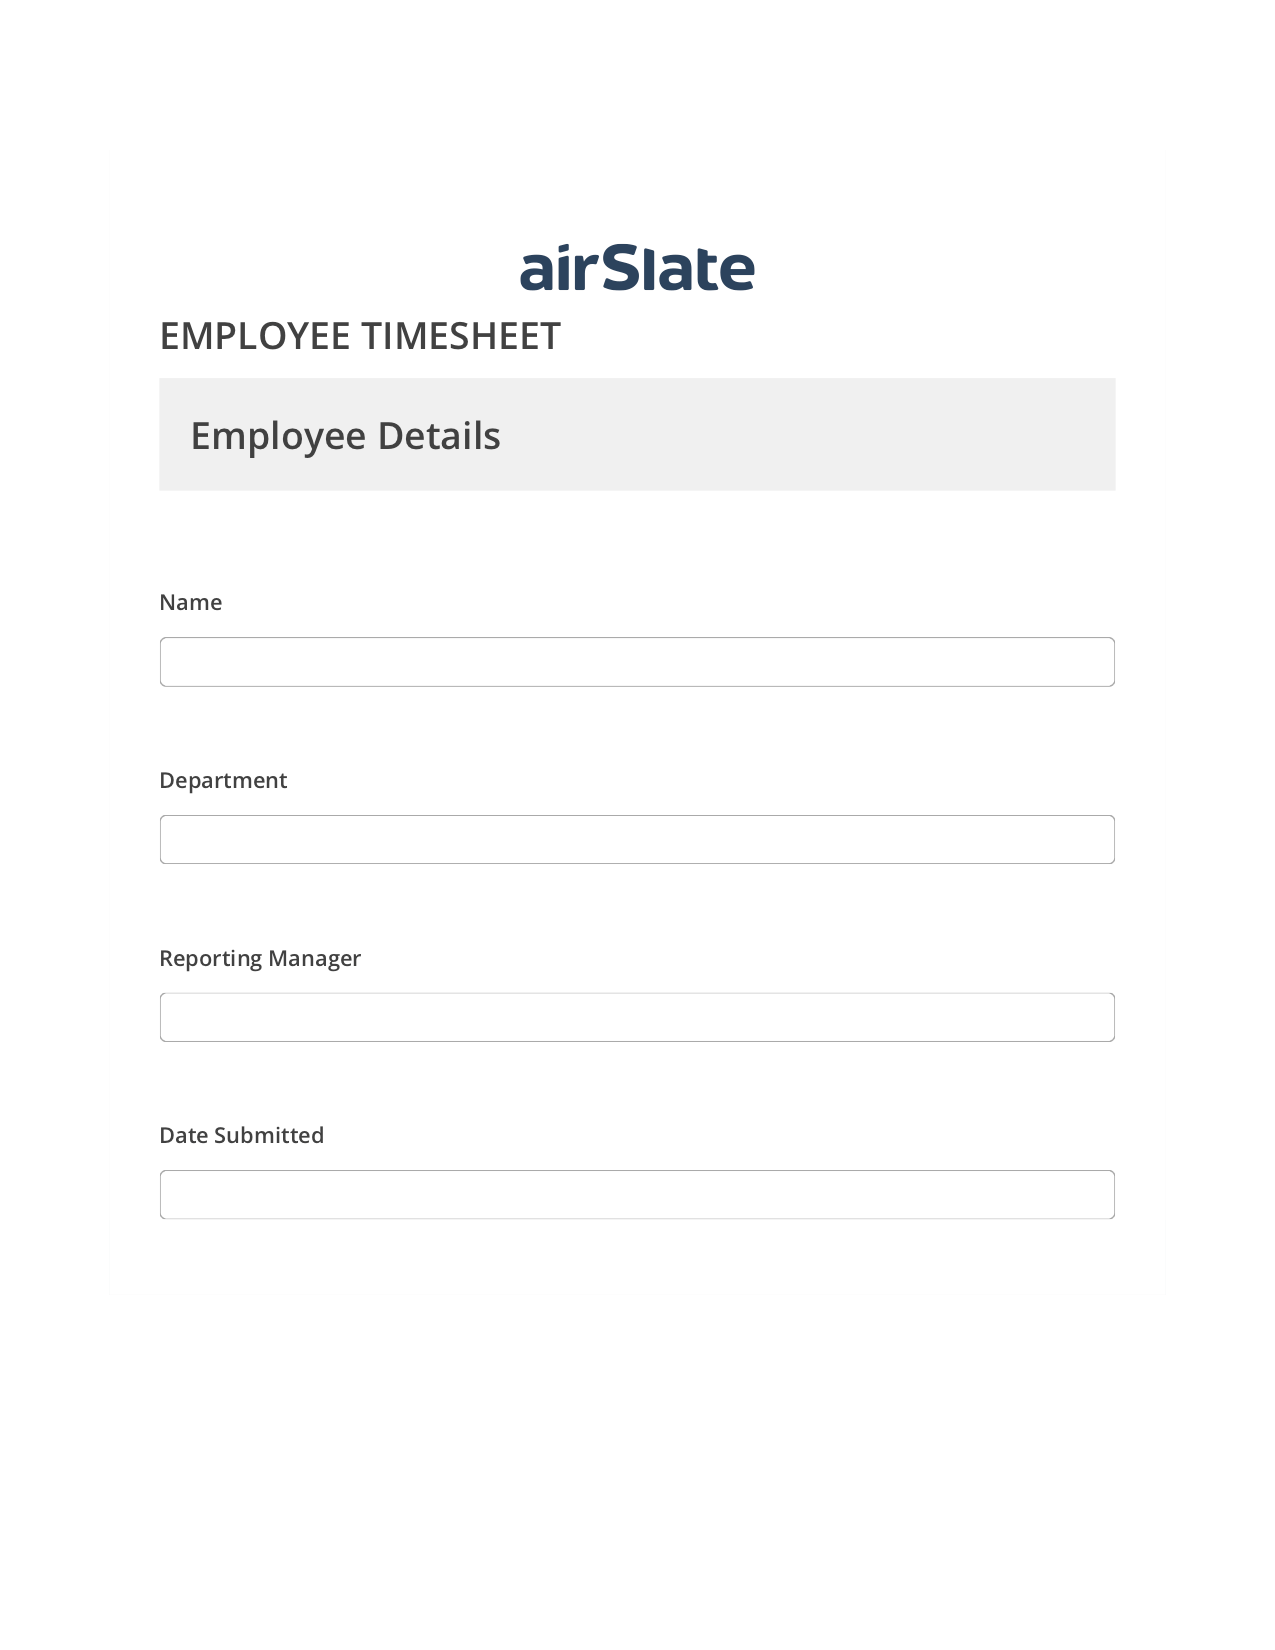 Multirole Employee Timesheet Workflow Pre-fill Document Bot, Add Tags to Slate Bot, Export to NetSuite Record Bot